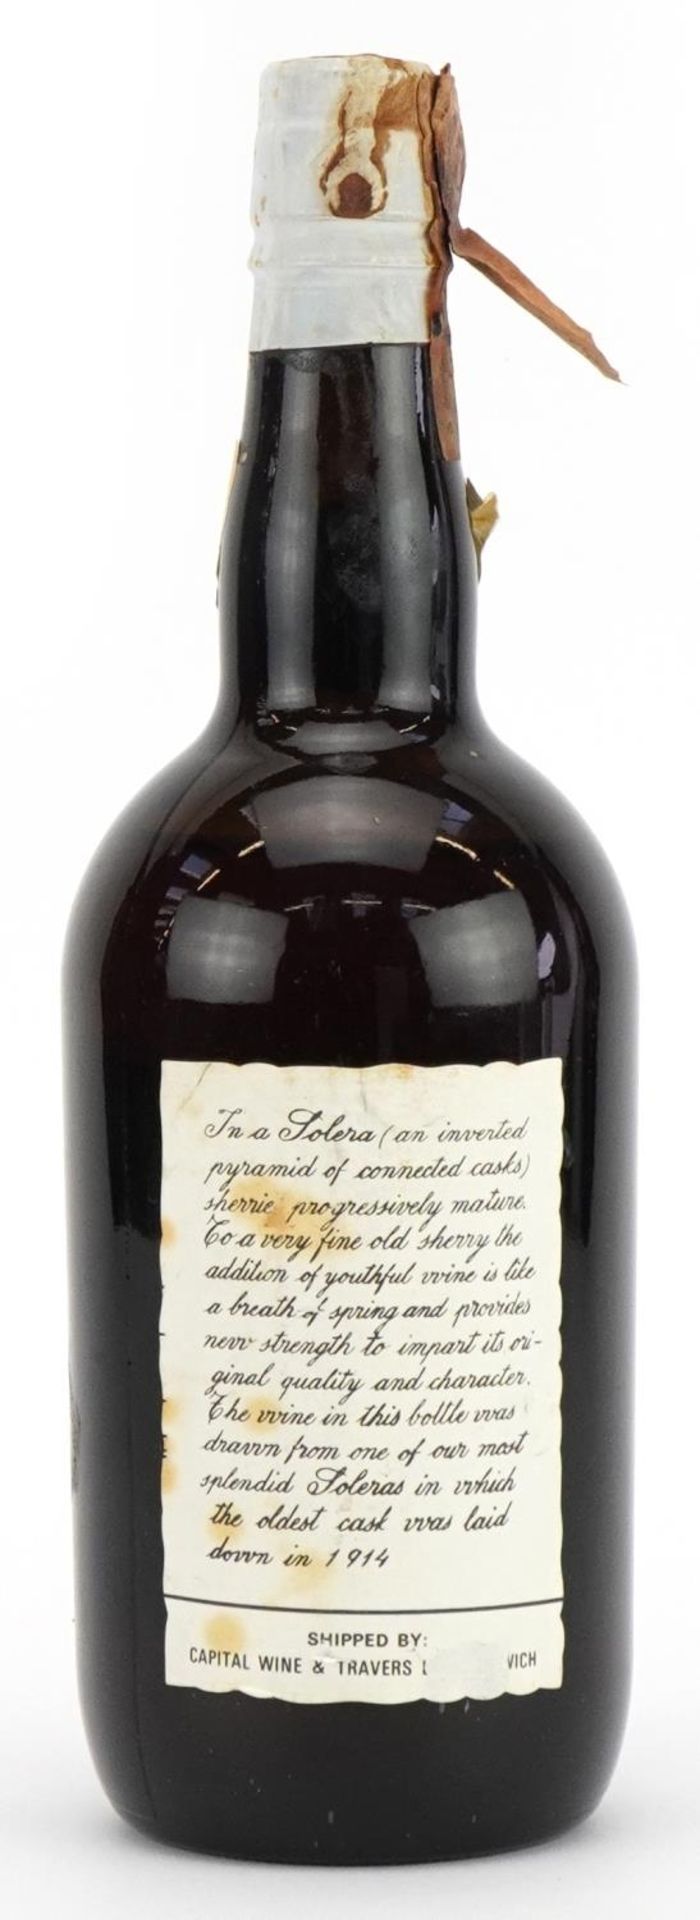 Bottle of Berisford Solera 1914 sherry : For further information on this lot please visit - Image 2 of 3